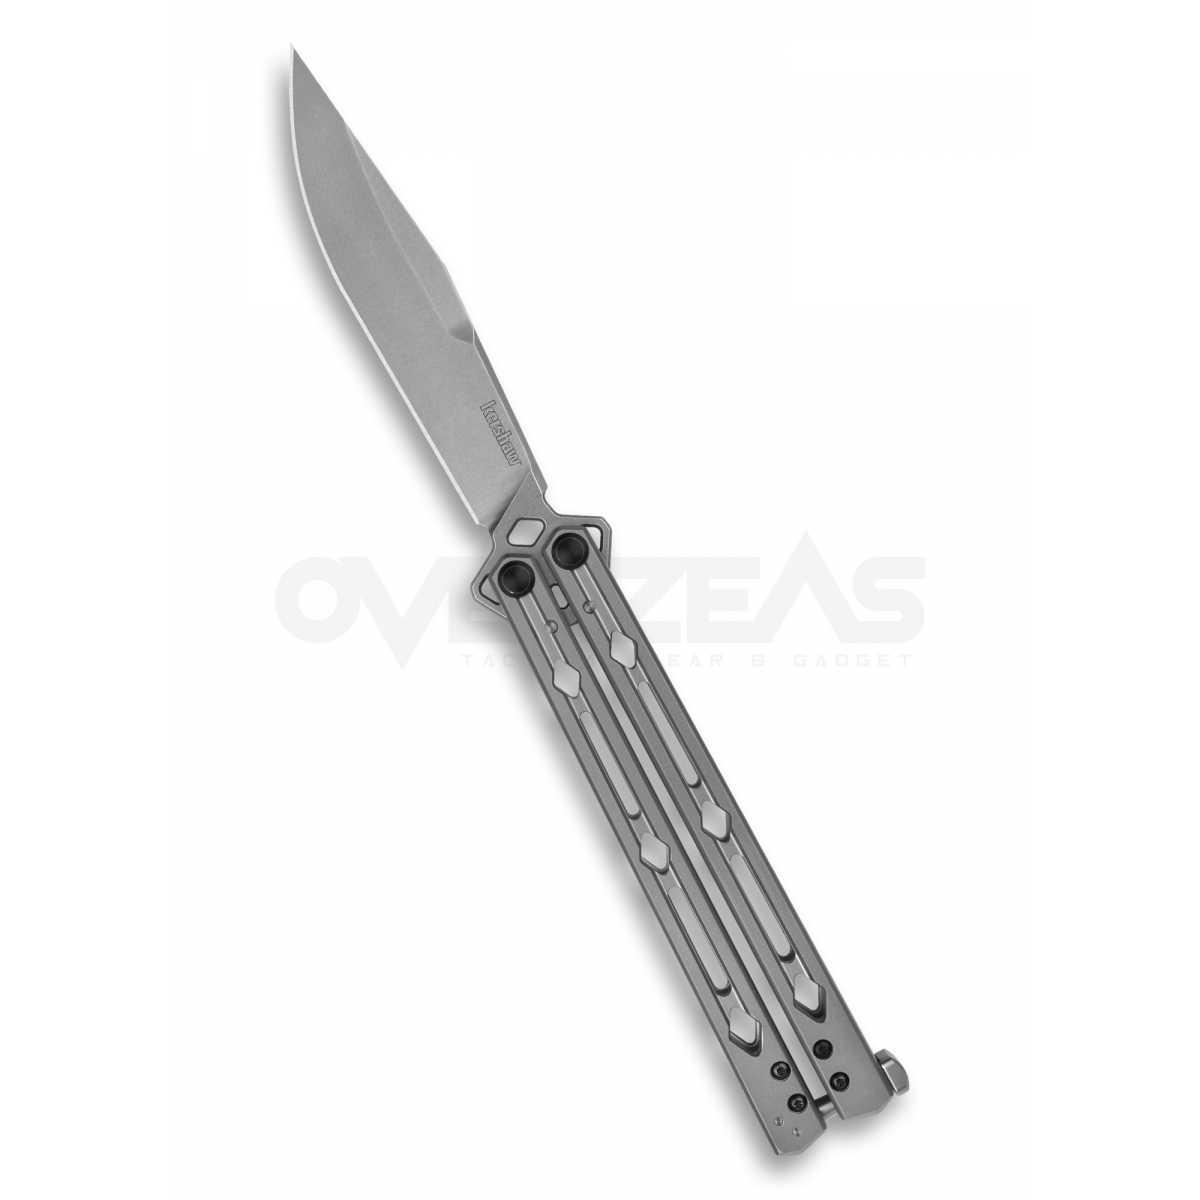 Kershaw 5150BW Lucha Balisong/Butterfly Knife - Knives for Sale